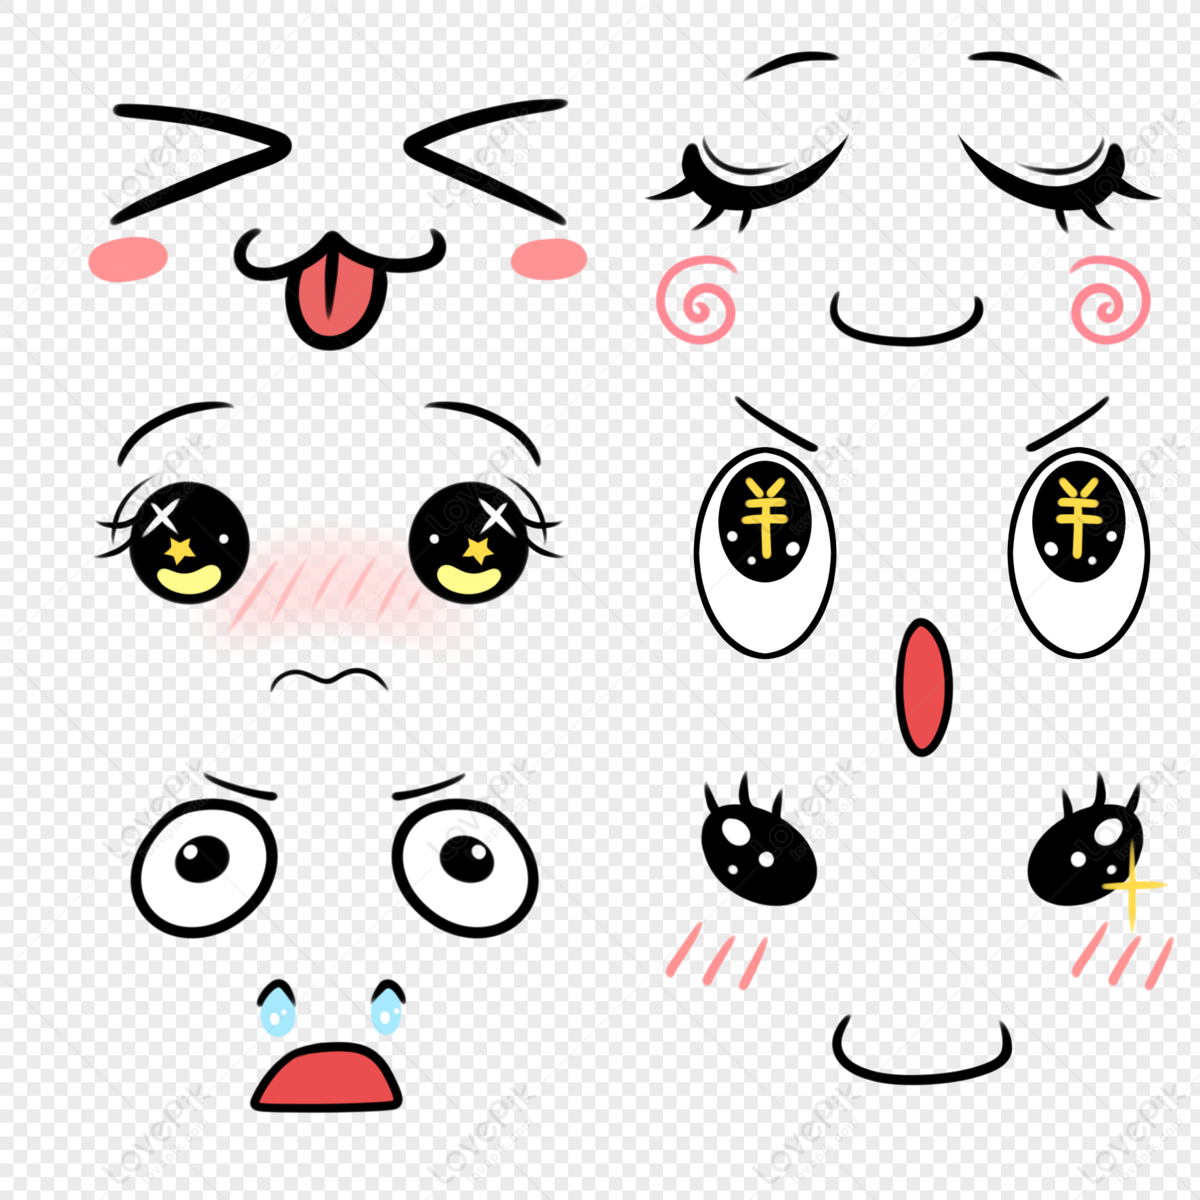 Kawai Cute Expression Set, Expression, Clip Art, Kawai PNG Transparent  Clipart Image and PSD File for Free Download